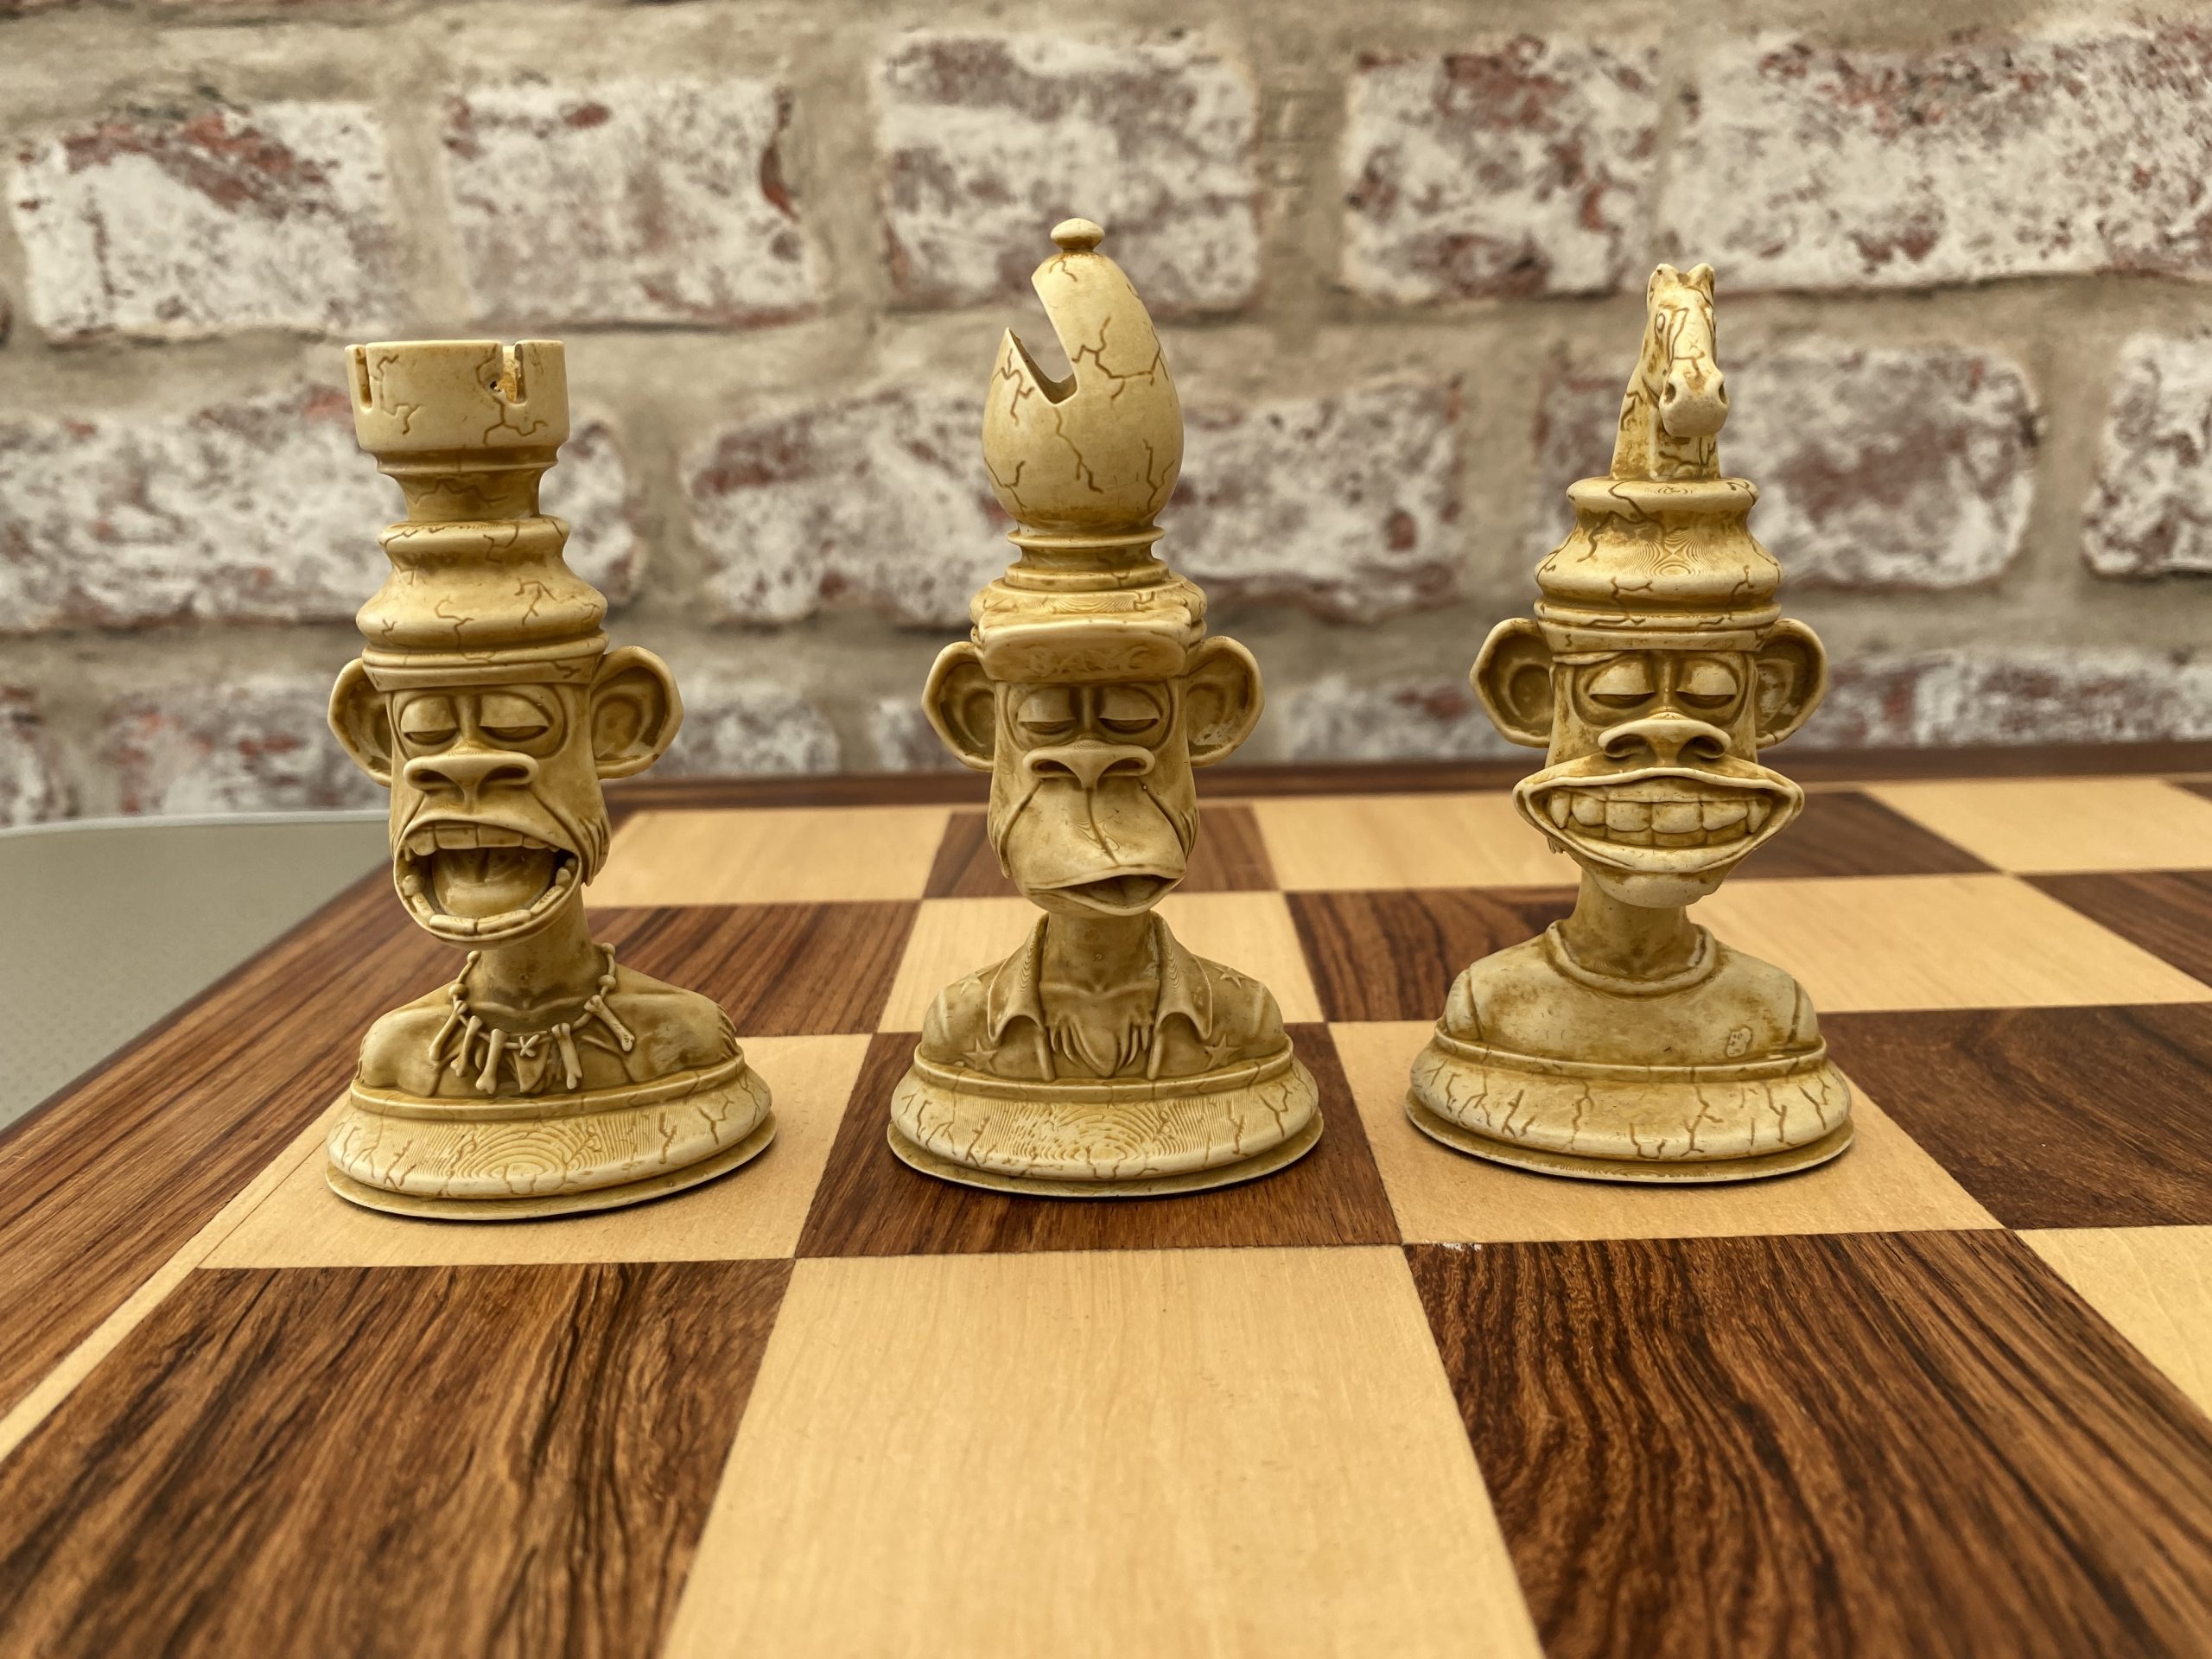 Best Selling  Chess Sets for Sale in 2022 Reviewed